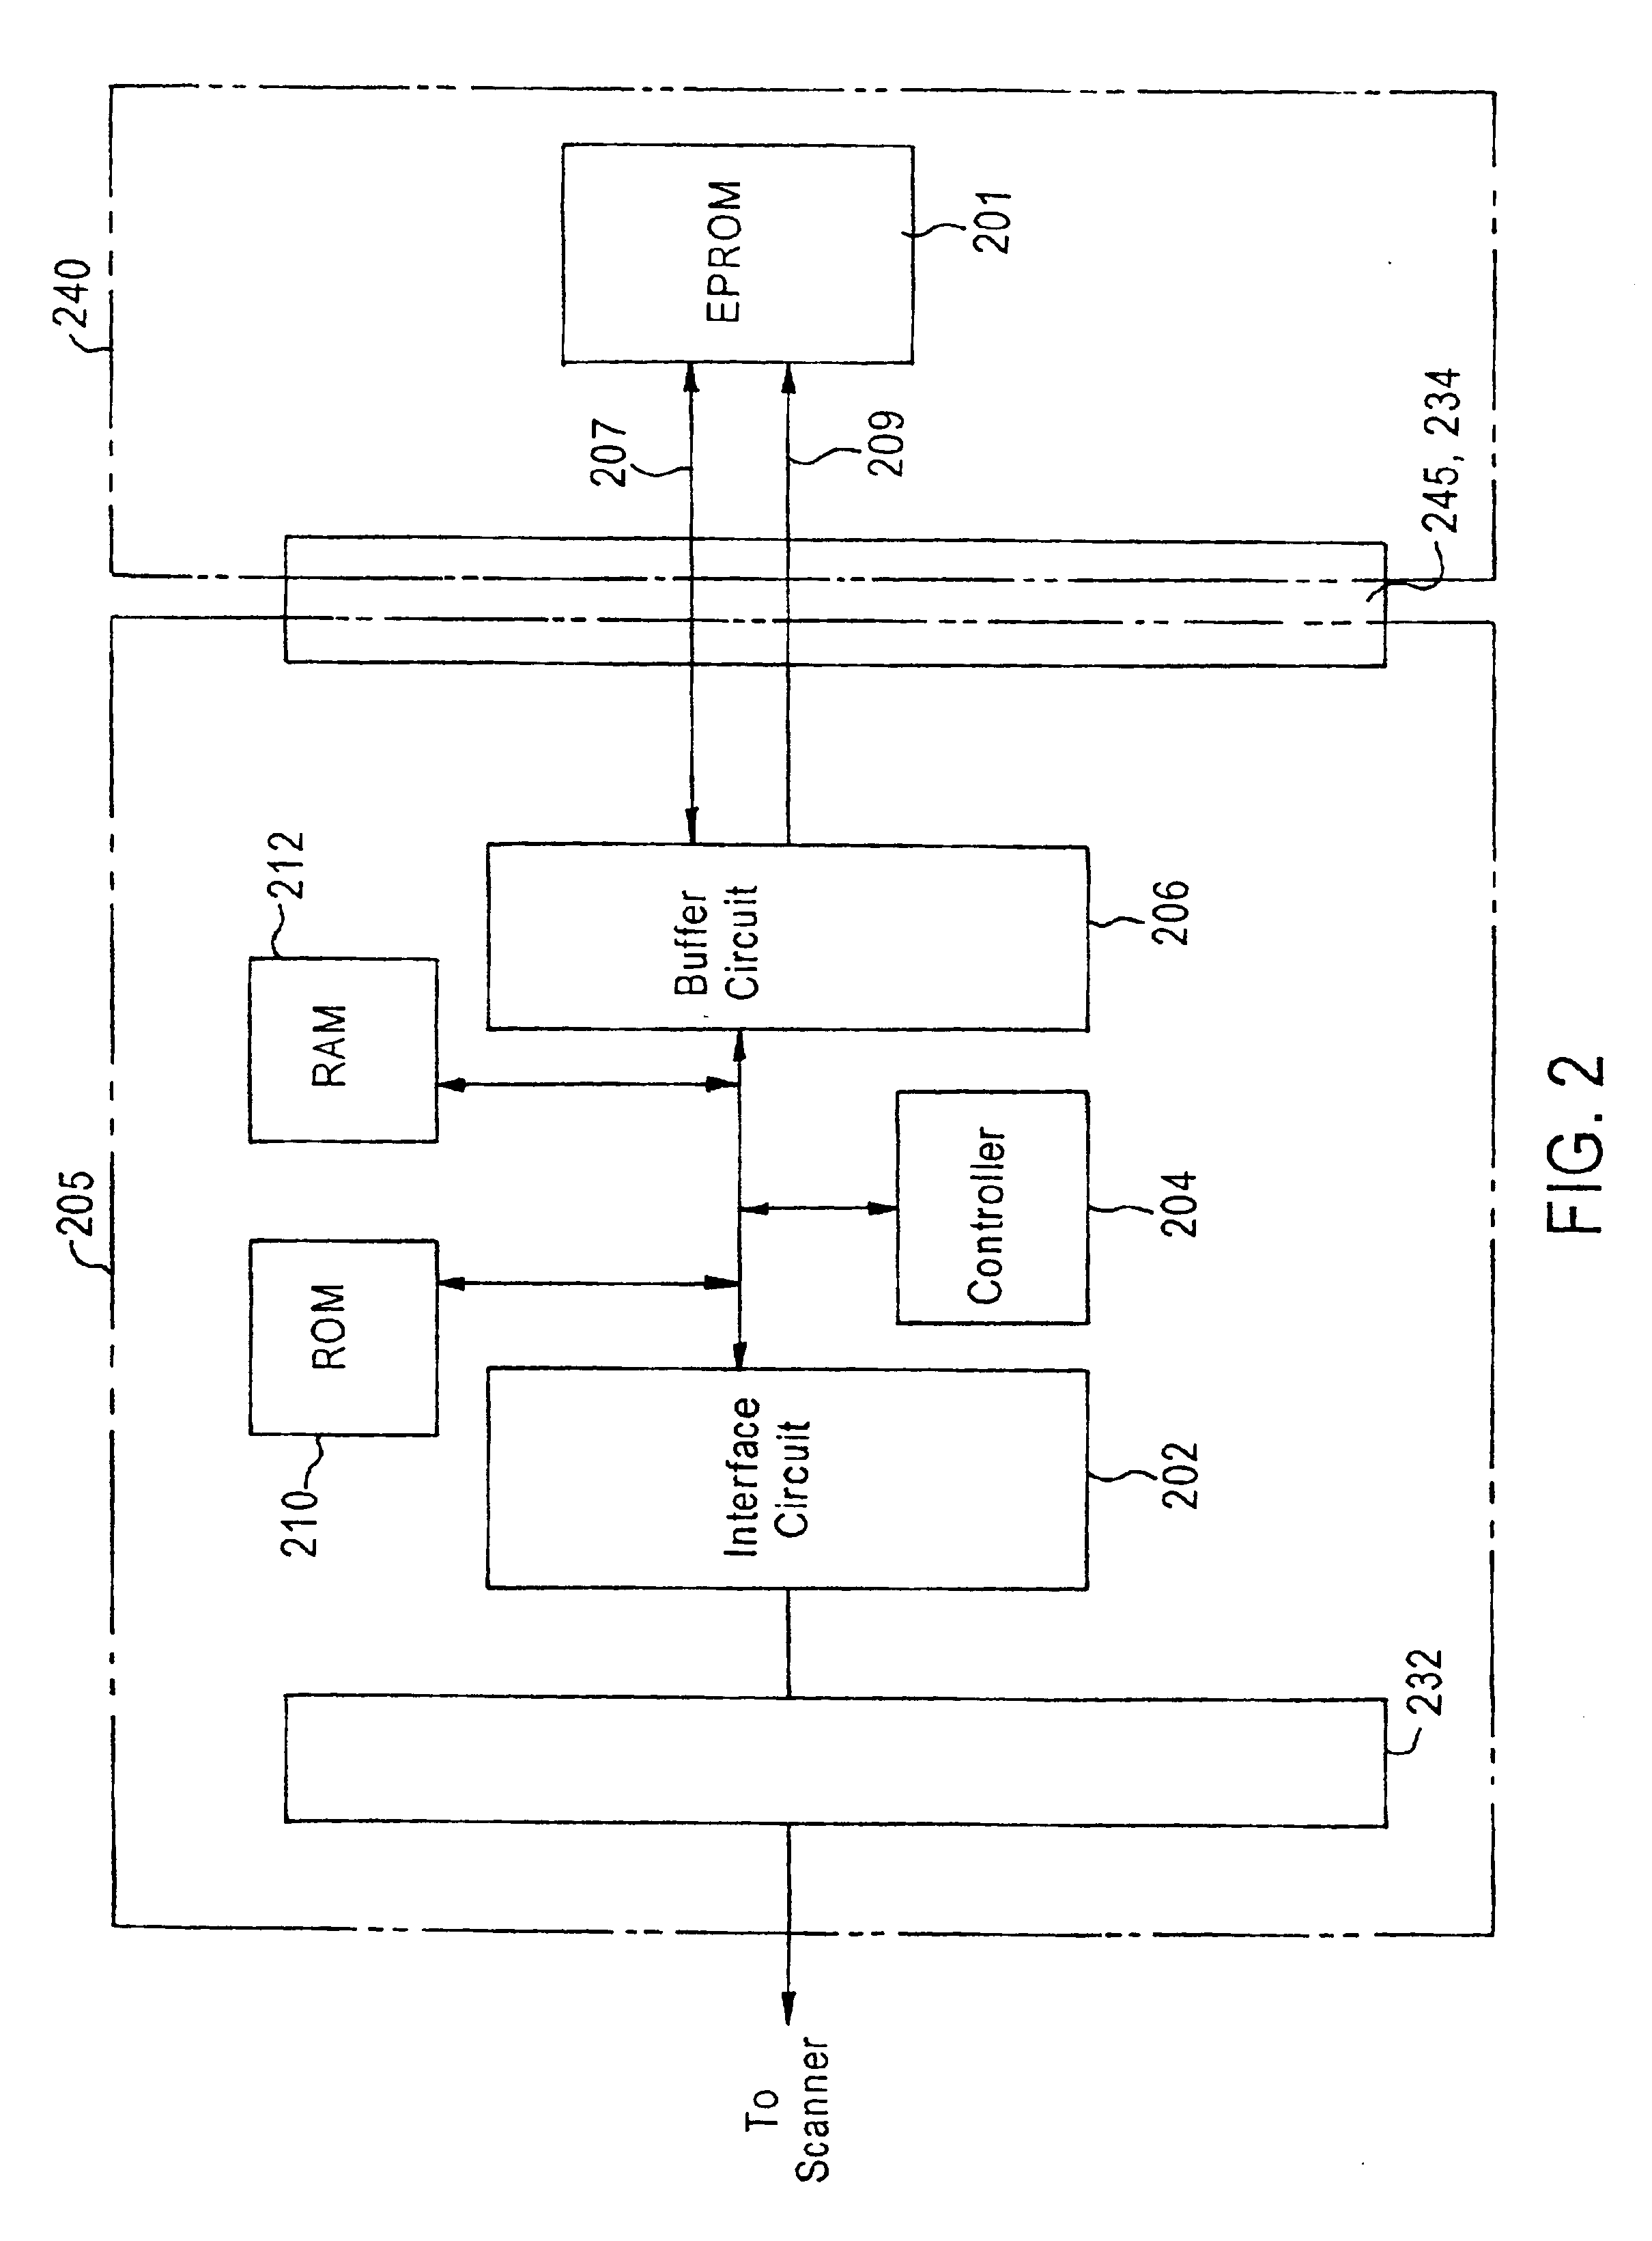 Detachable cartridge unit and auxiliary unit for function expansion of a data processing system